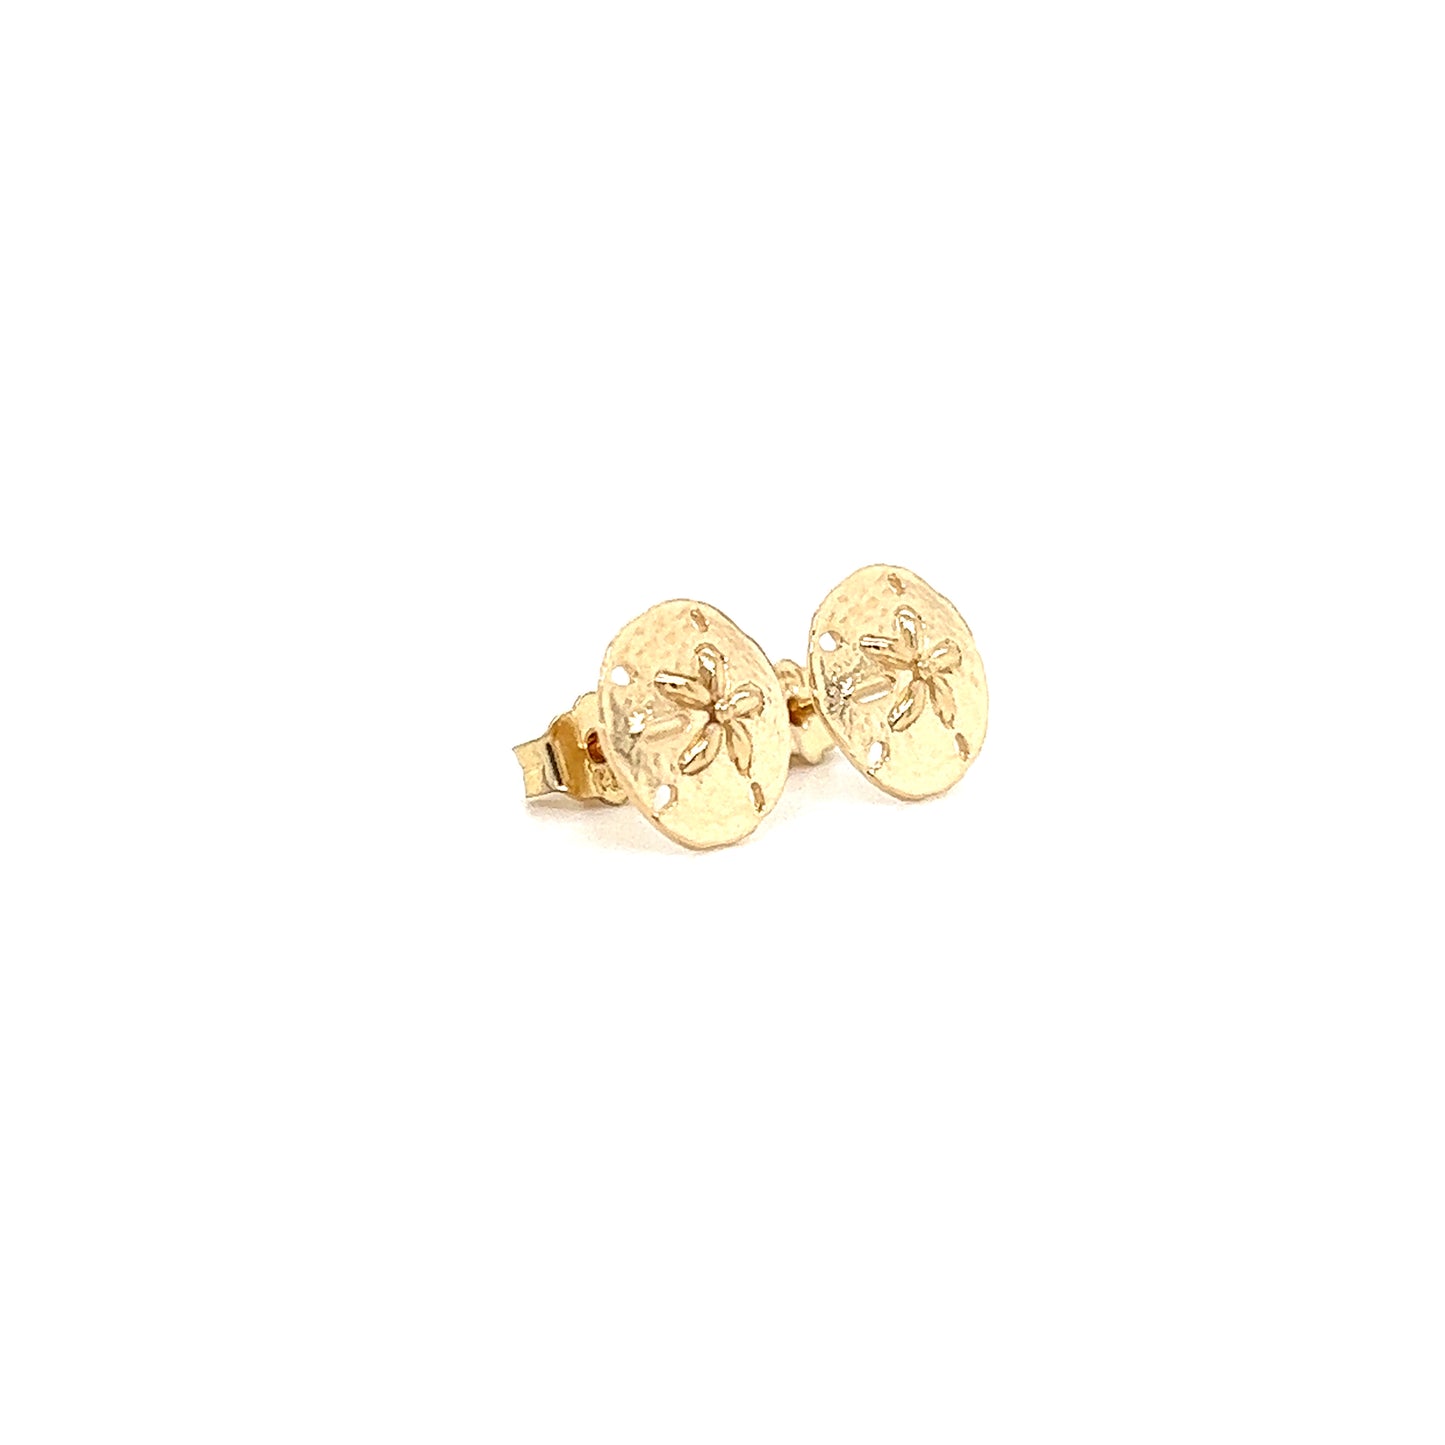 Sand Dollar Stud Earrings in 14K Yellow Gold Right Side View